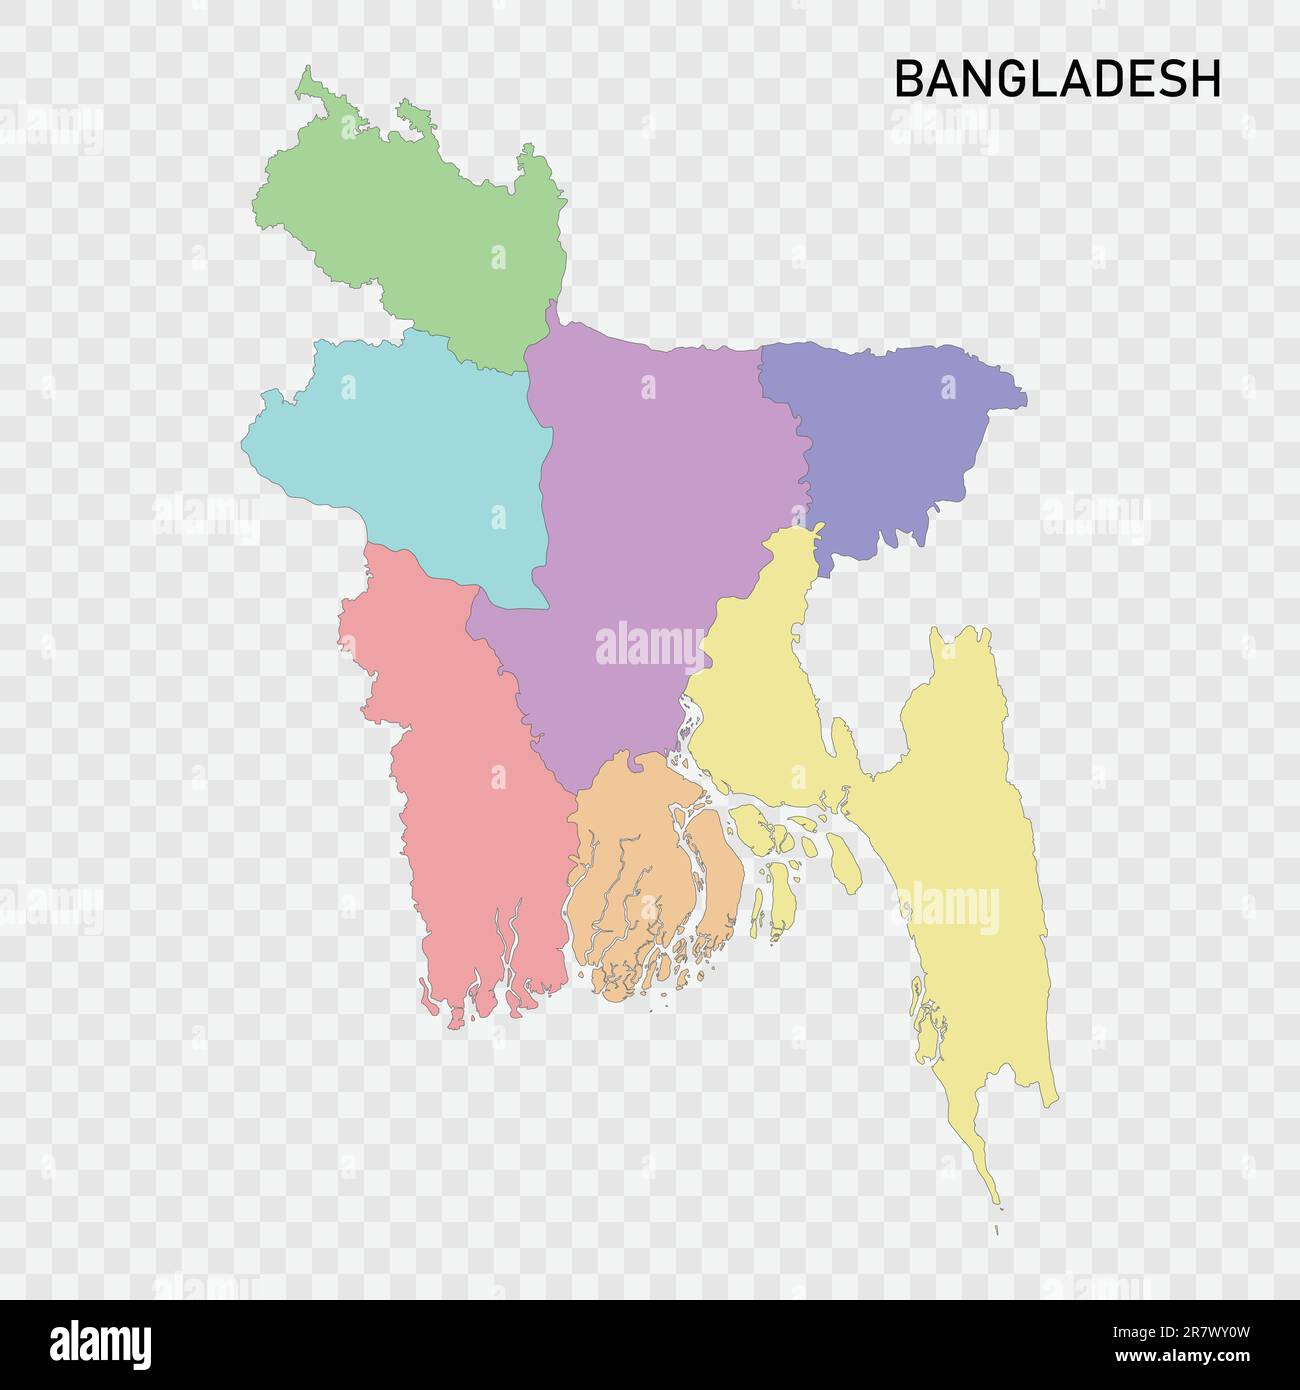 Isolated colored map of Bangladesh with borders of the regions Stock ...